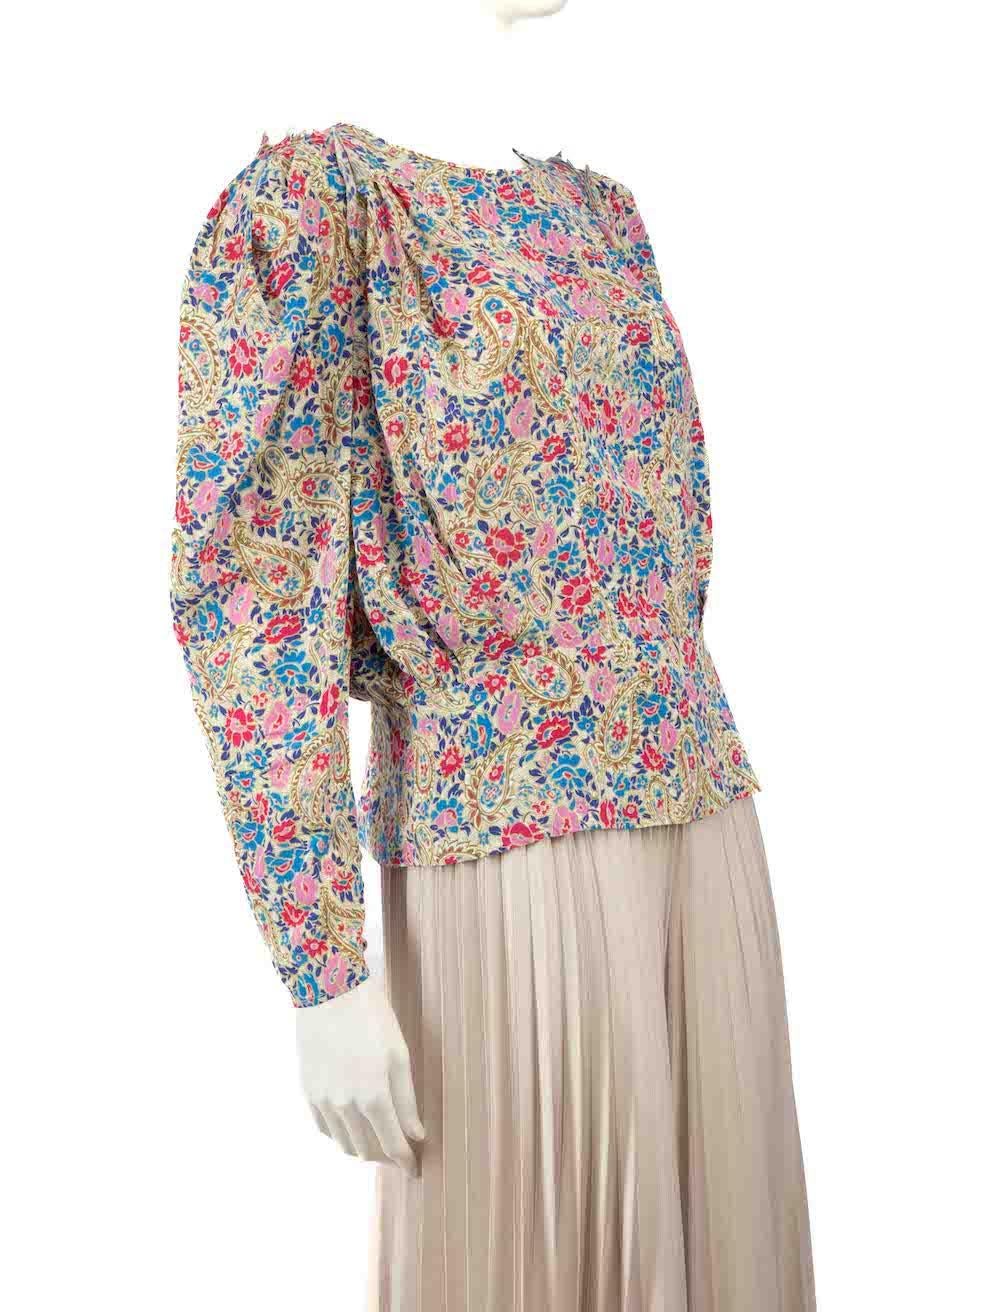 CONDITION is Very good. Hardly any visible wear to top is evident on this used Isabel Marant designer resale item.
 
 
 
 Details
 
 
 Multicolour- pink, blue
 
 Silk
 
 Top
 
 Floral and paisley print
 
 Long sleeves
 
 Round neck
 
 Buttoned